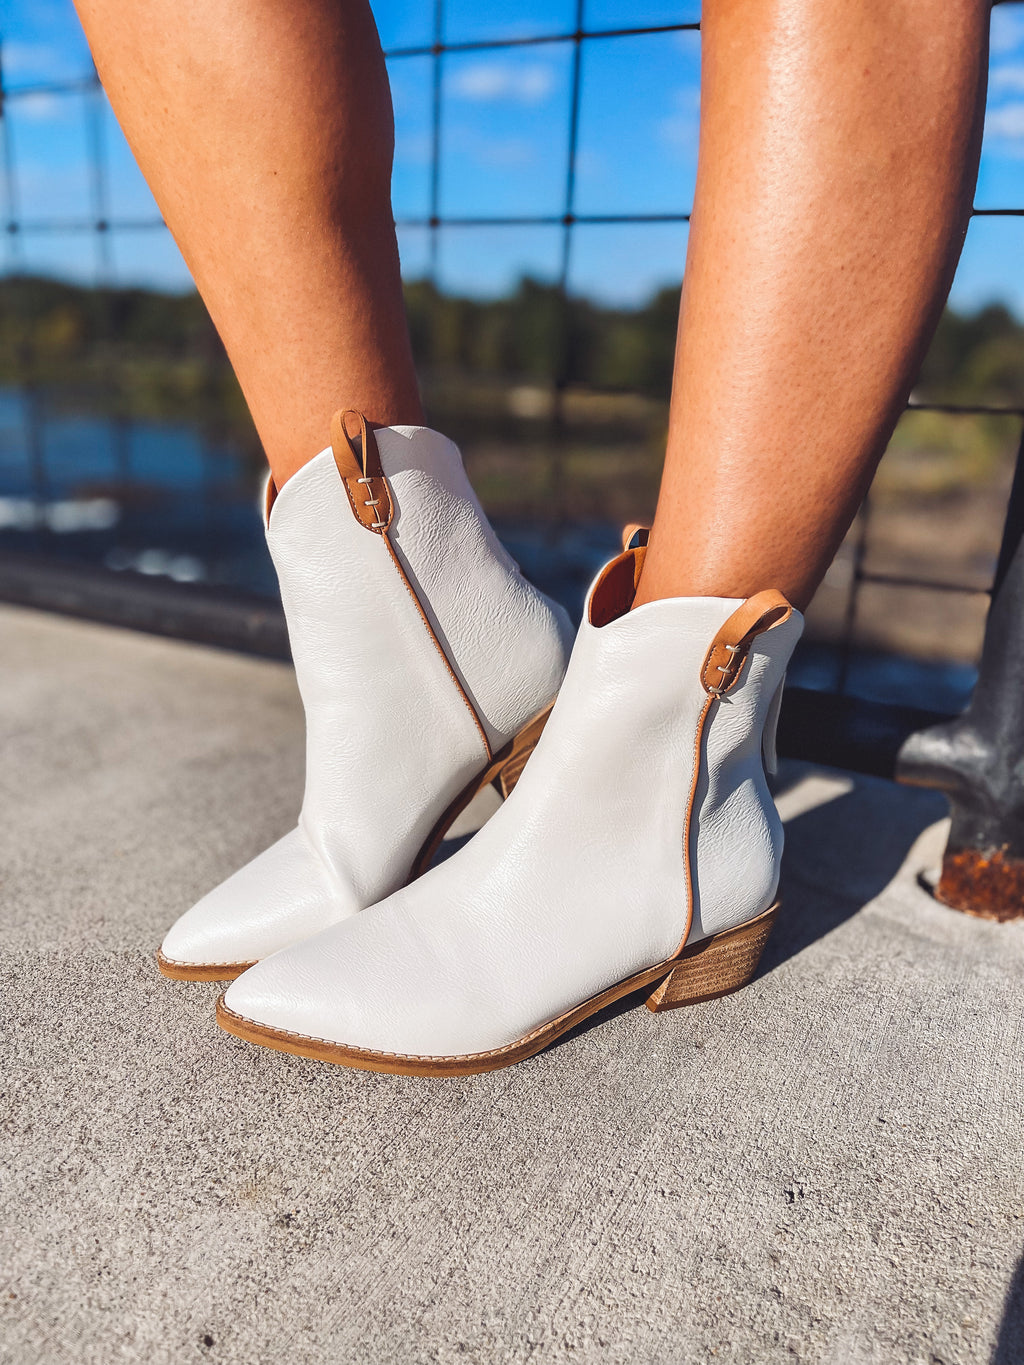 Take the day boots - The Posh Peach